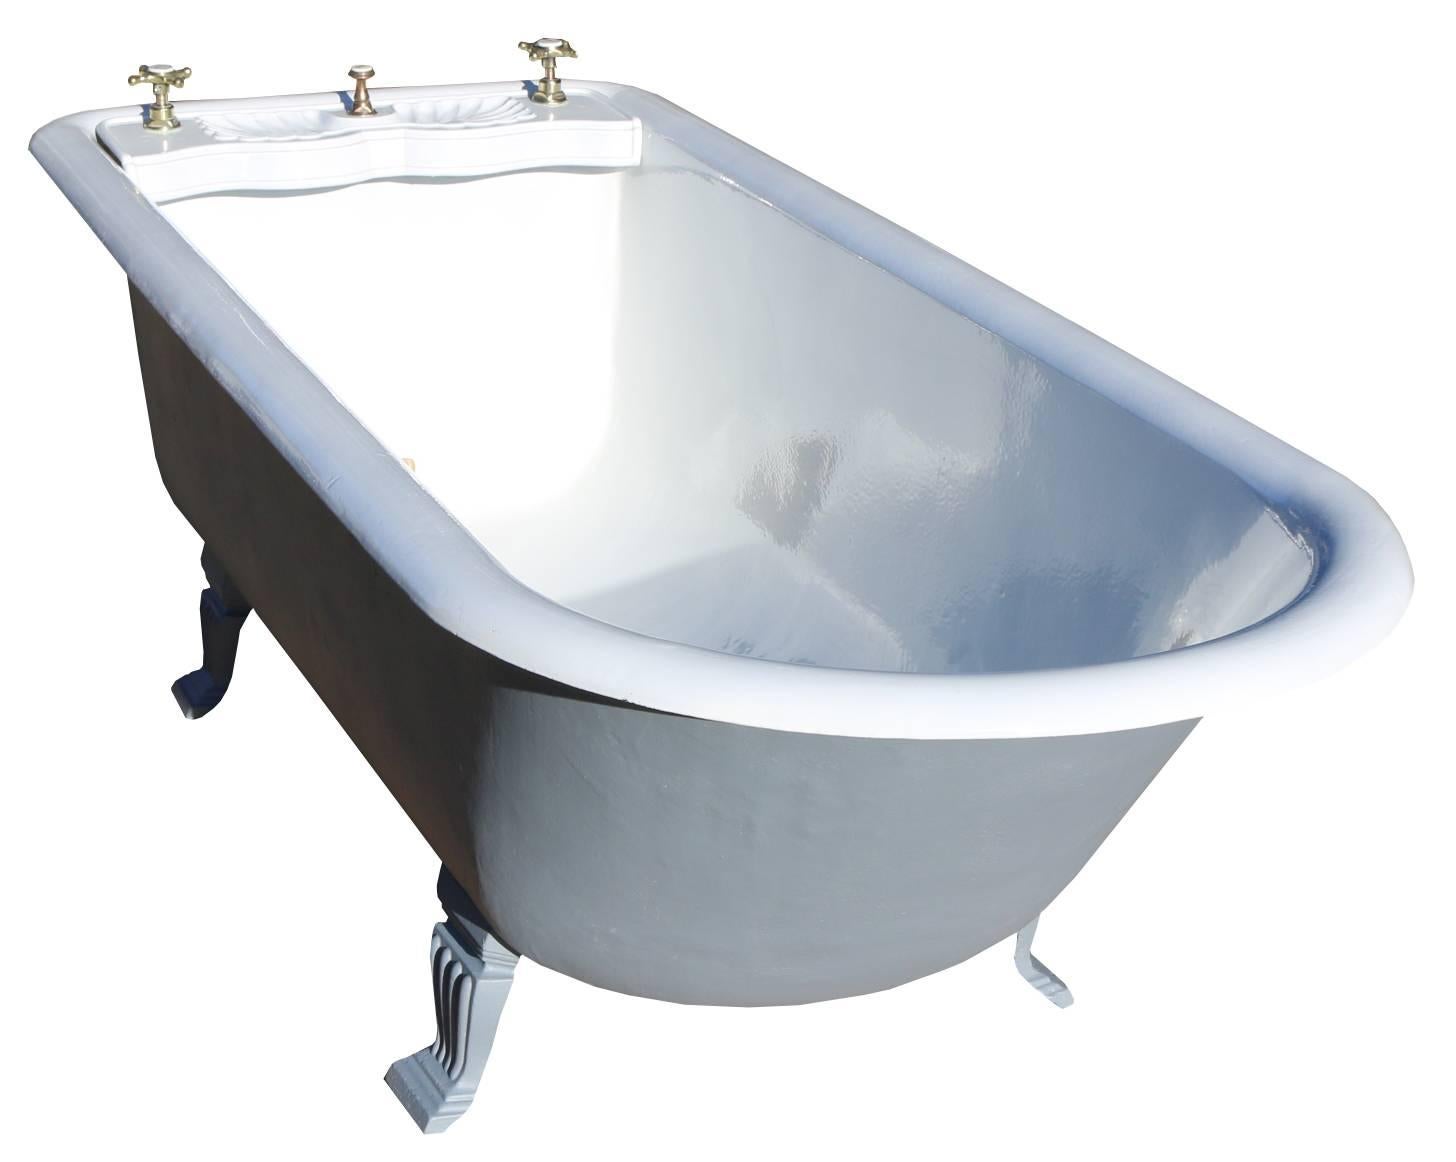 This bath has new vitreous enamel and has been fully restored. The bath is painted cream on the underside.
Measures: Weight 140 kg.